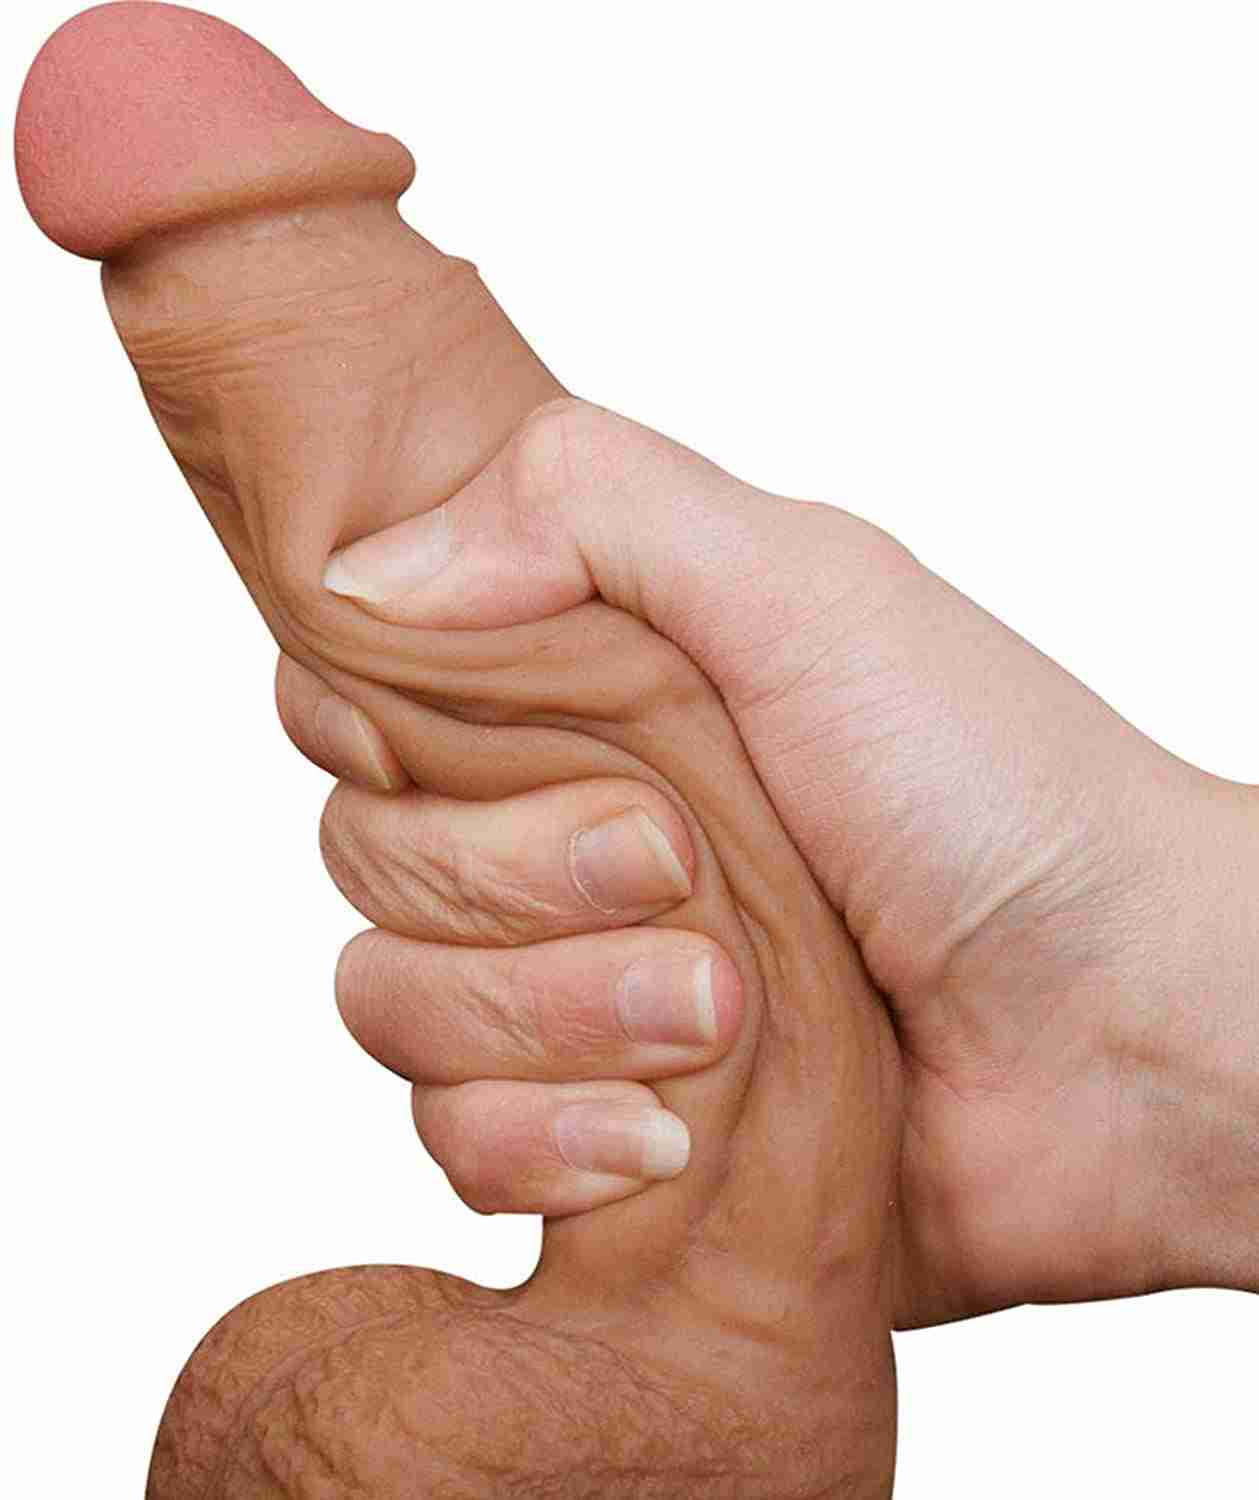 8.27 Inch Suction Cup Realistic Dildo with strong veins